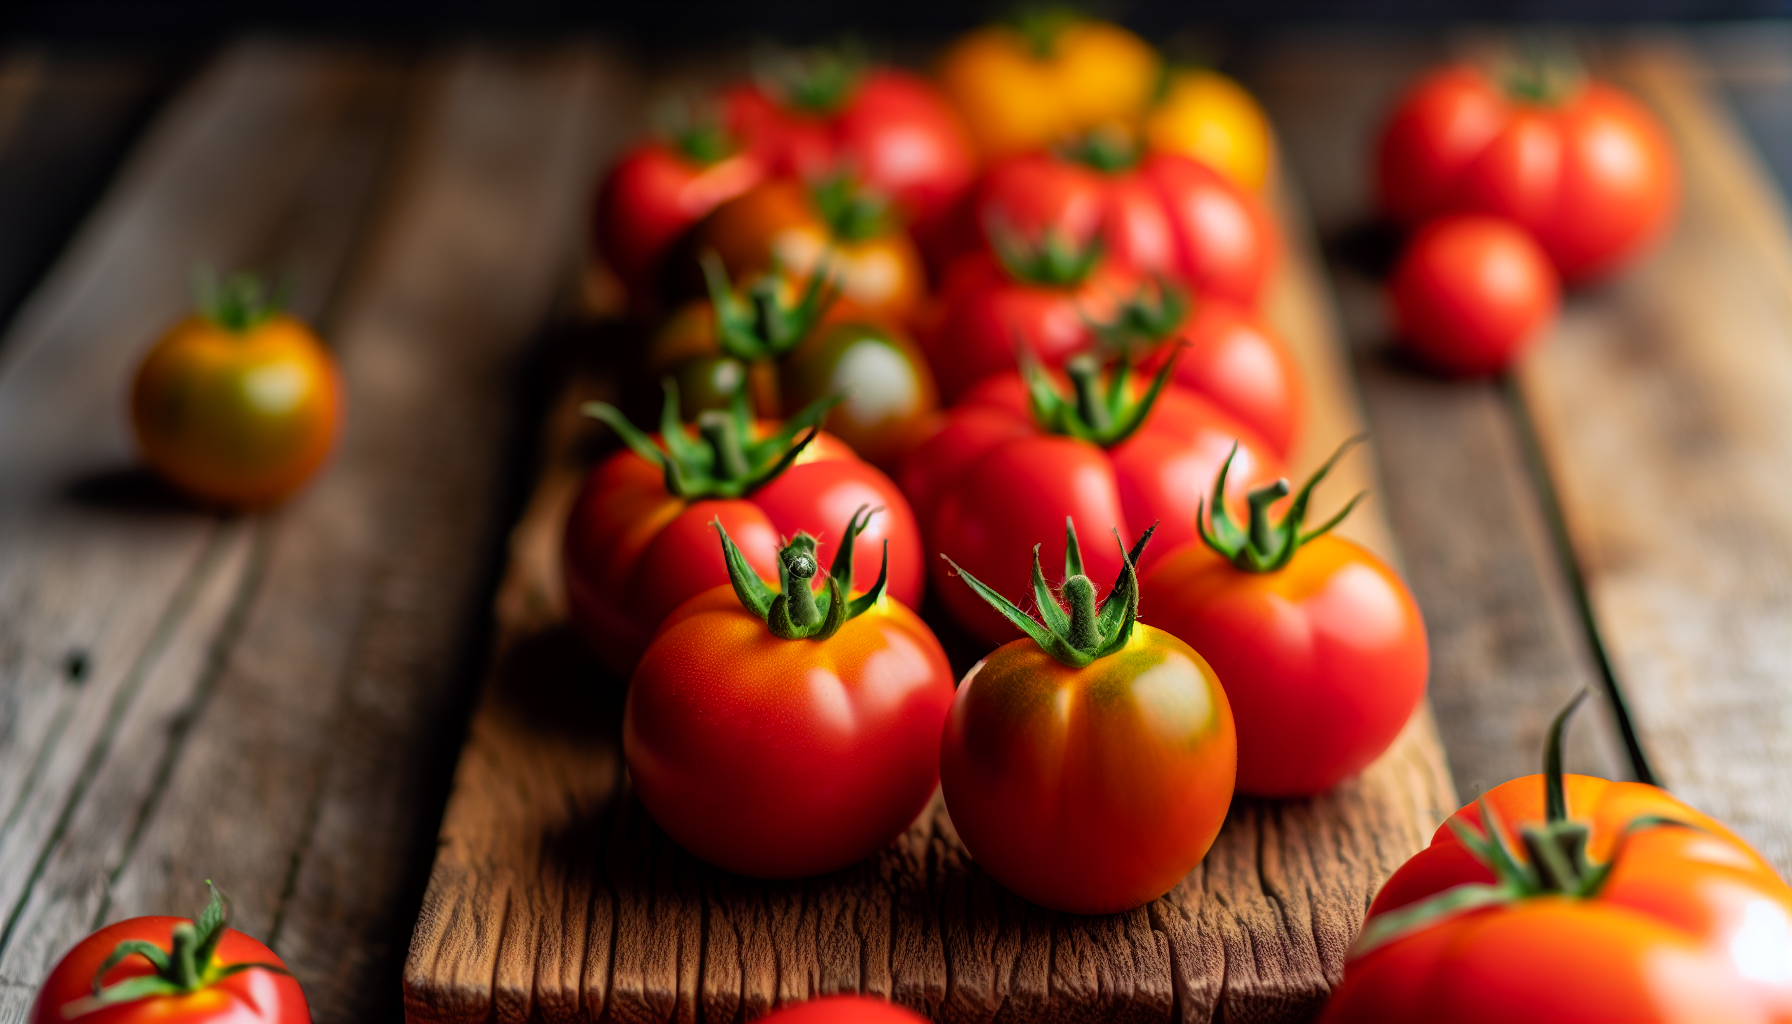 Tomatoes and inflammation - scientific evidence